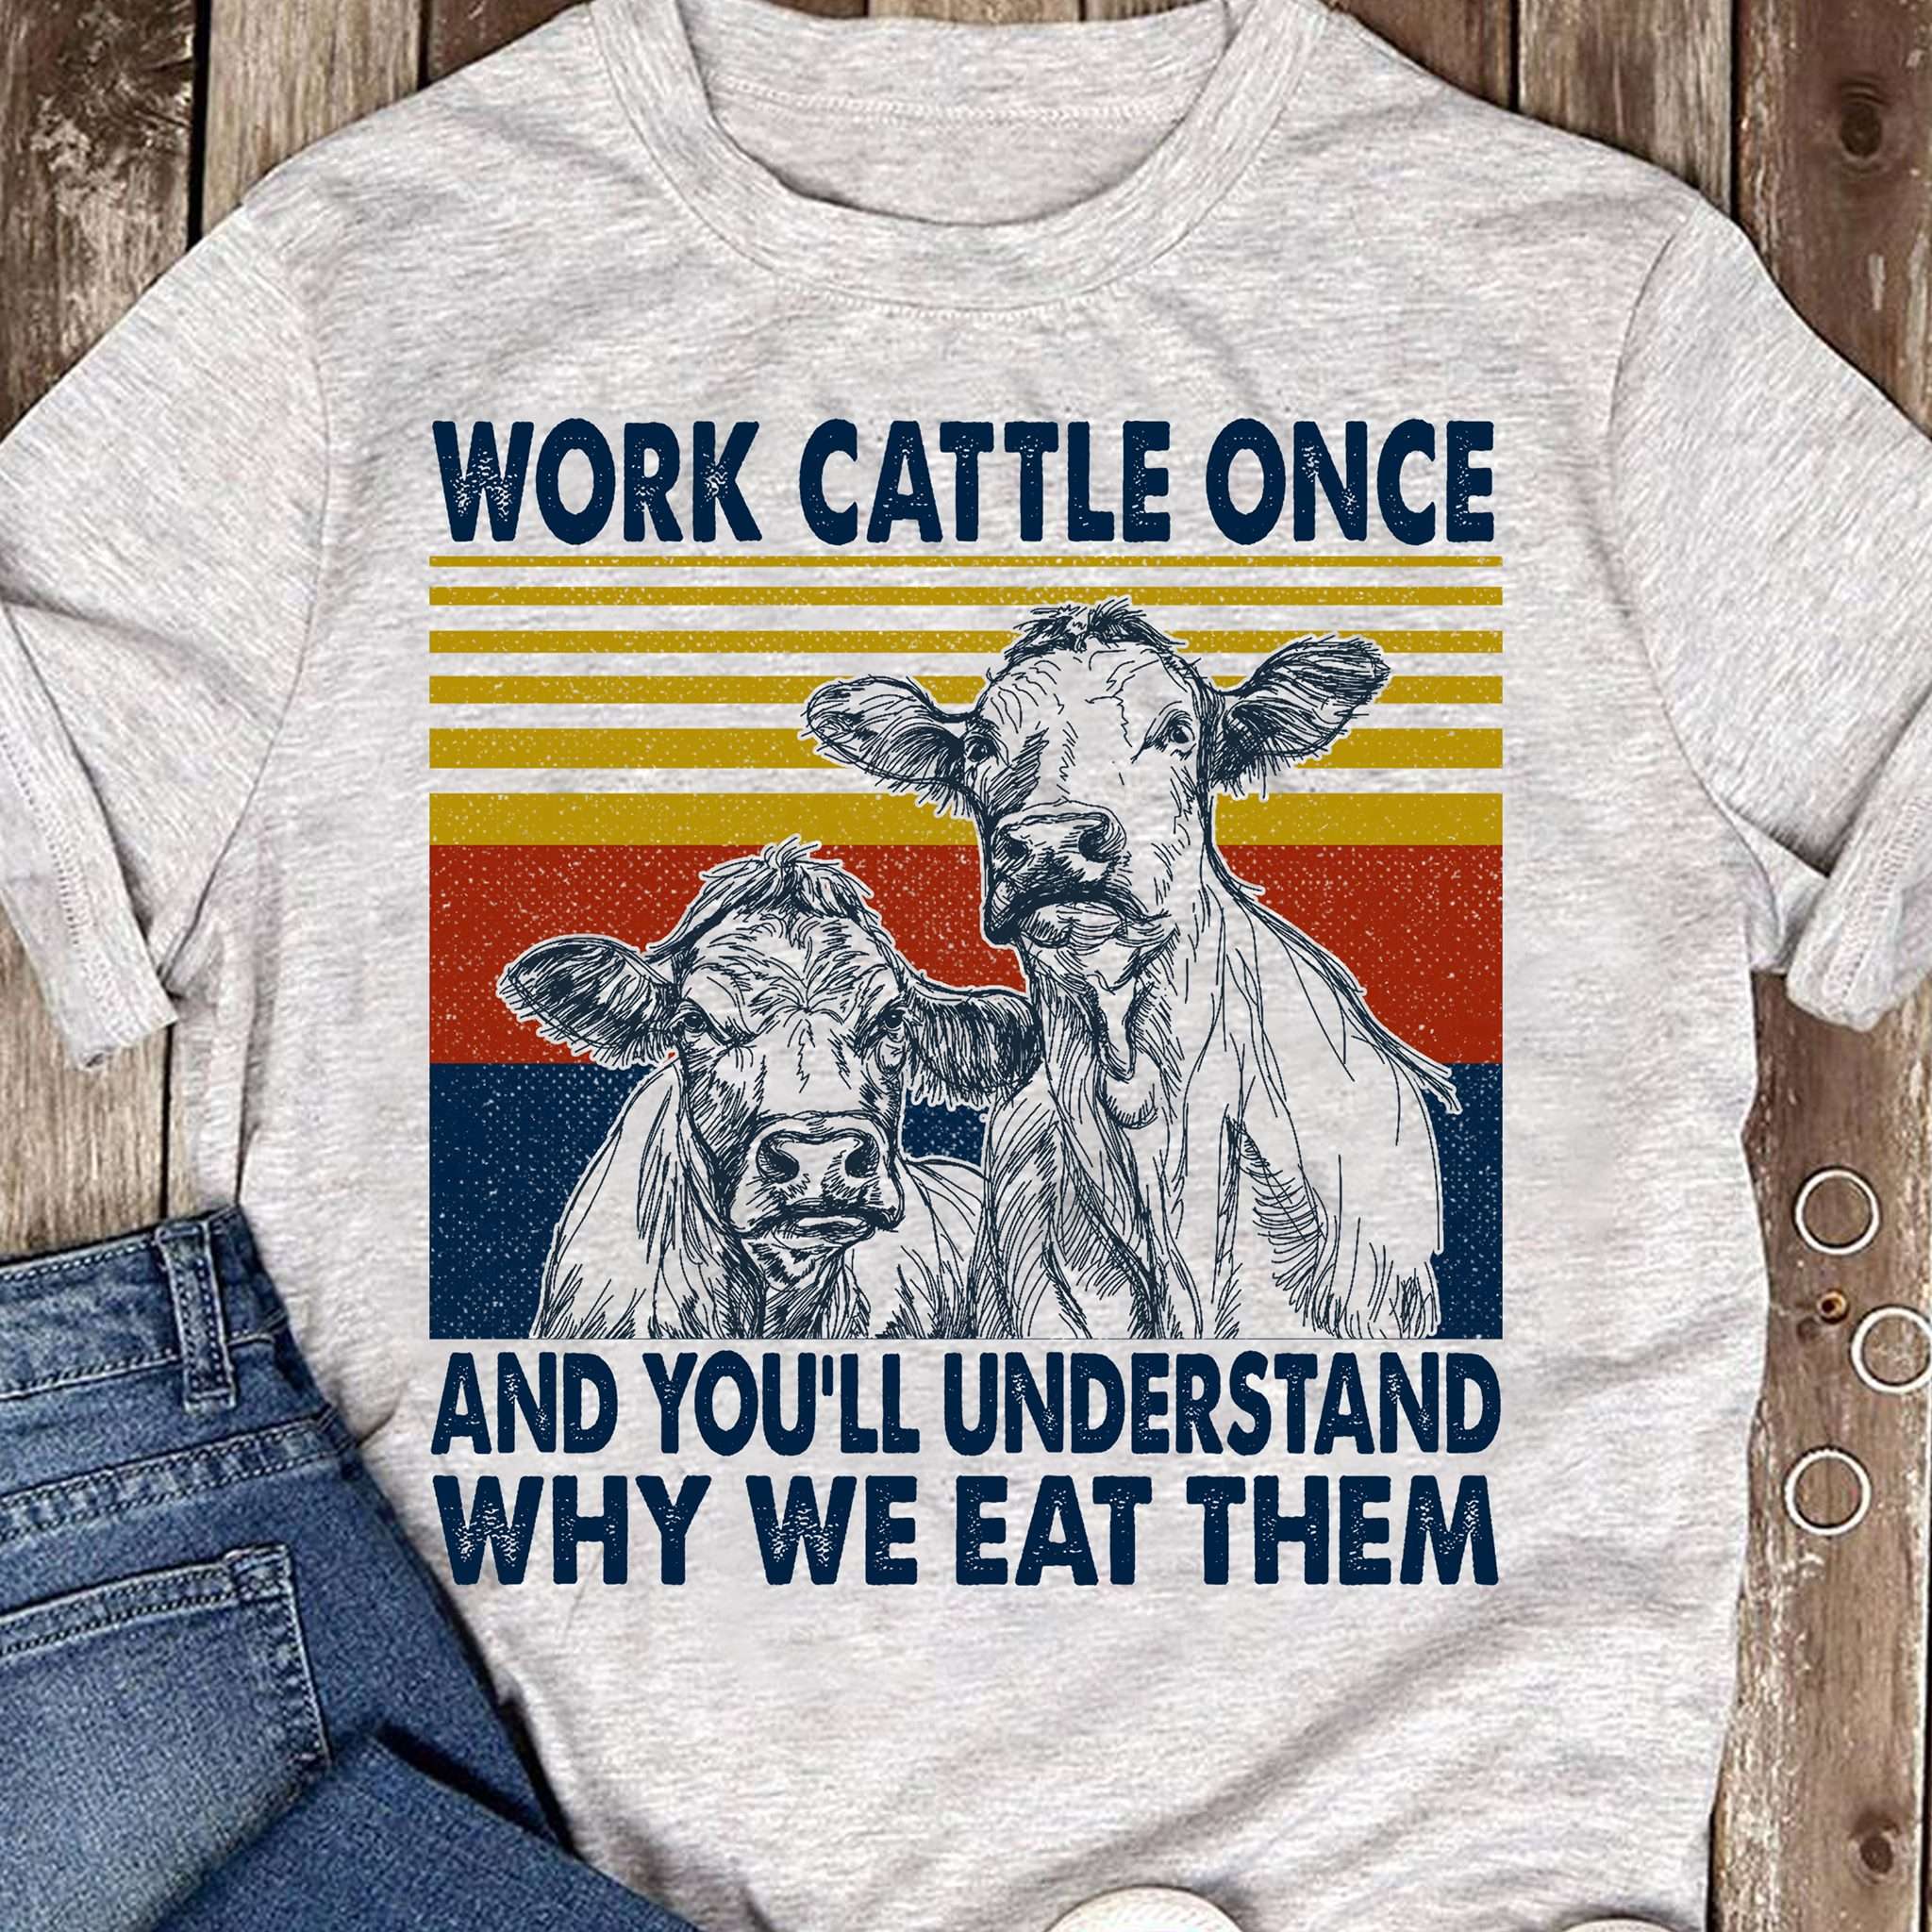 Work cattle once and you'll understand why we eat them - Cow animal lover, cow cattle work